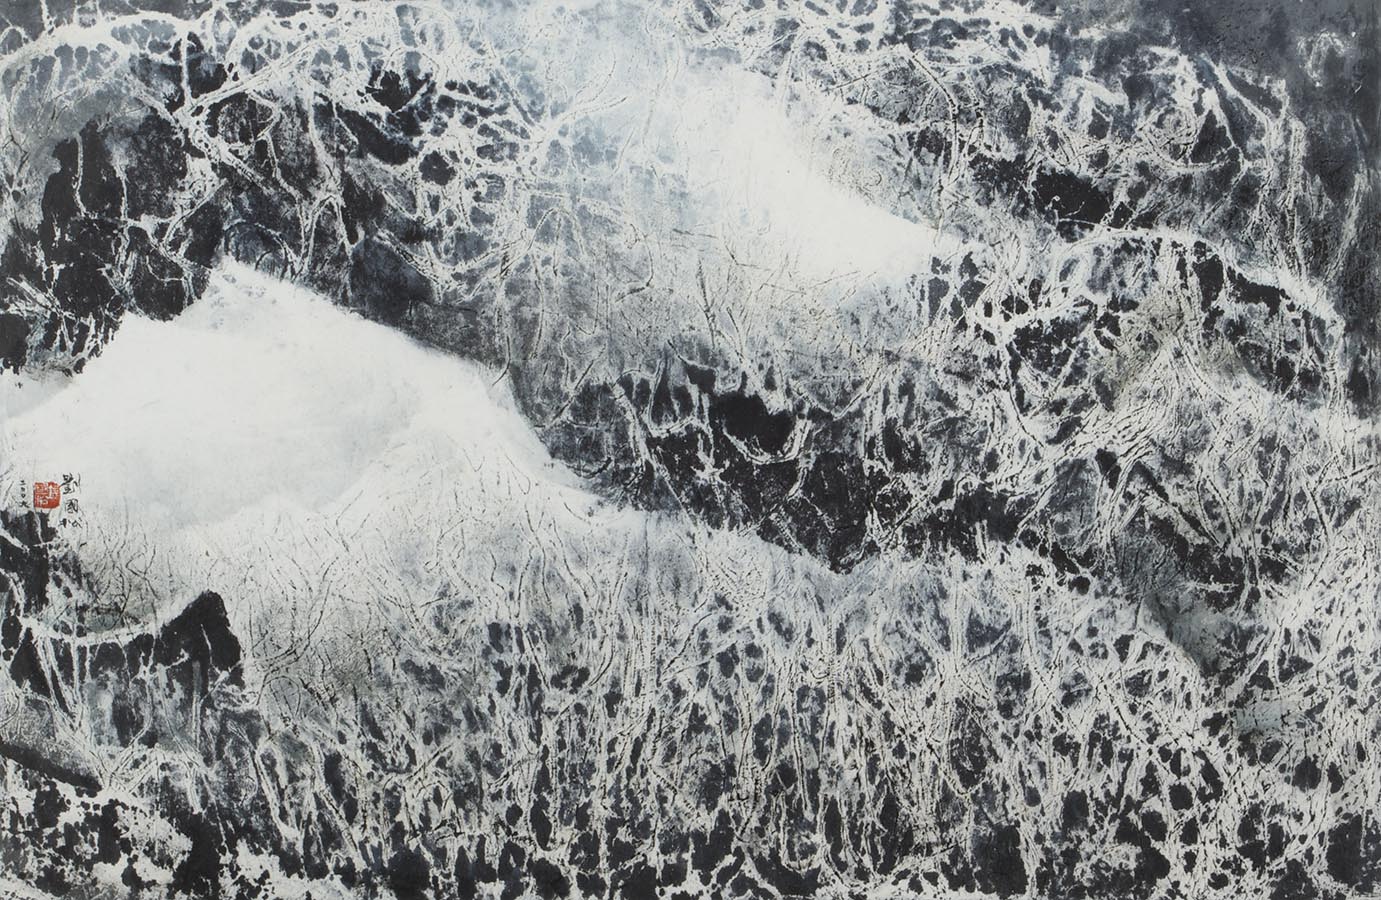 Liu Kuo-sung,<i> Icy Tree with Silver Branches</i>, 2009